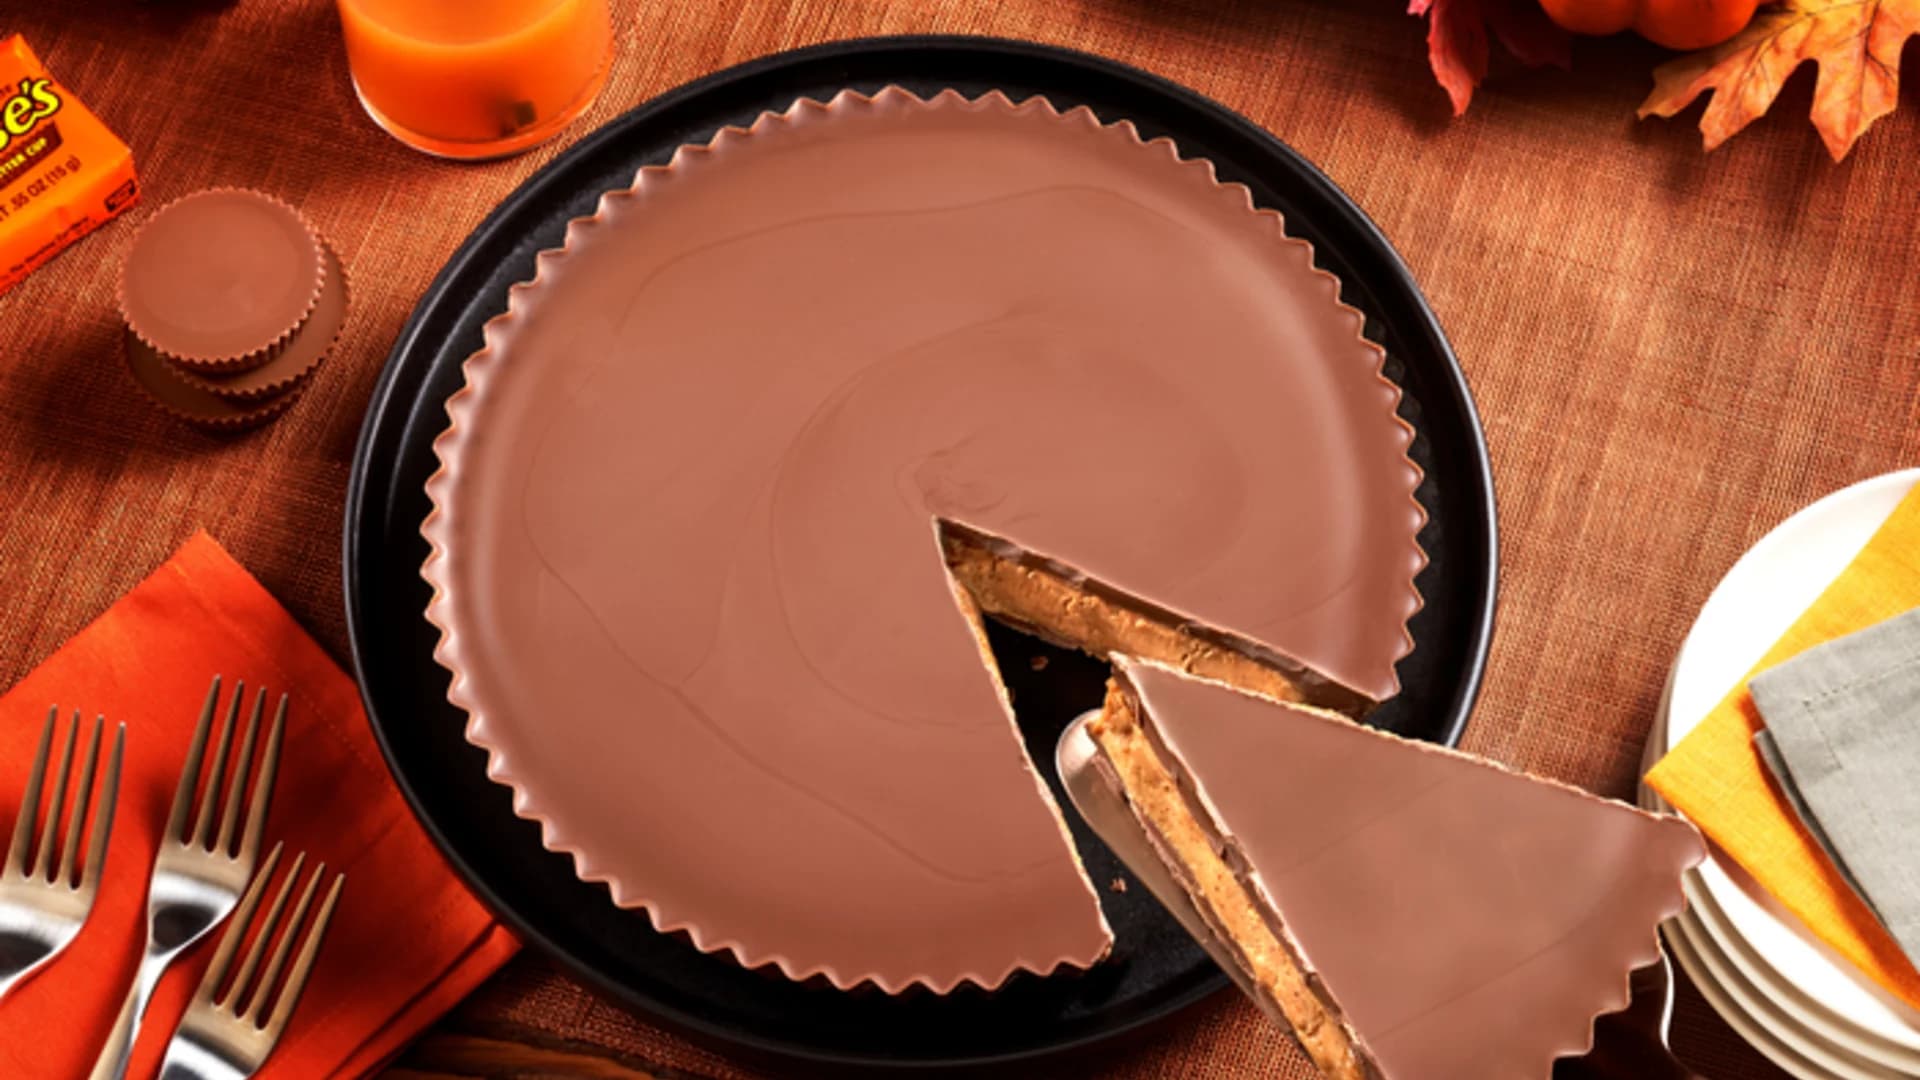 Reese's unveils 9-inch Peanut Butter Cup Thanksgiving Pie